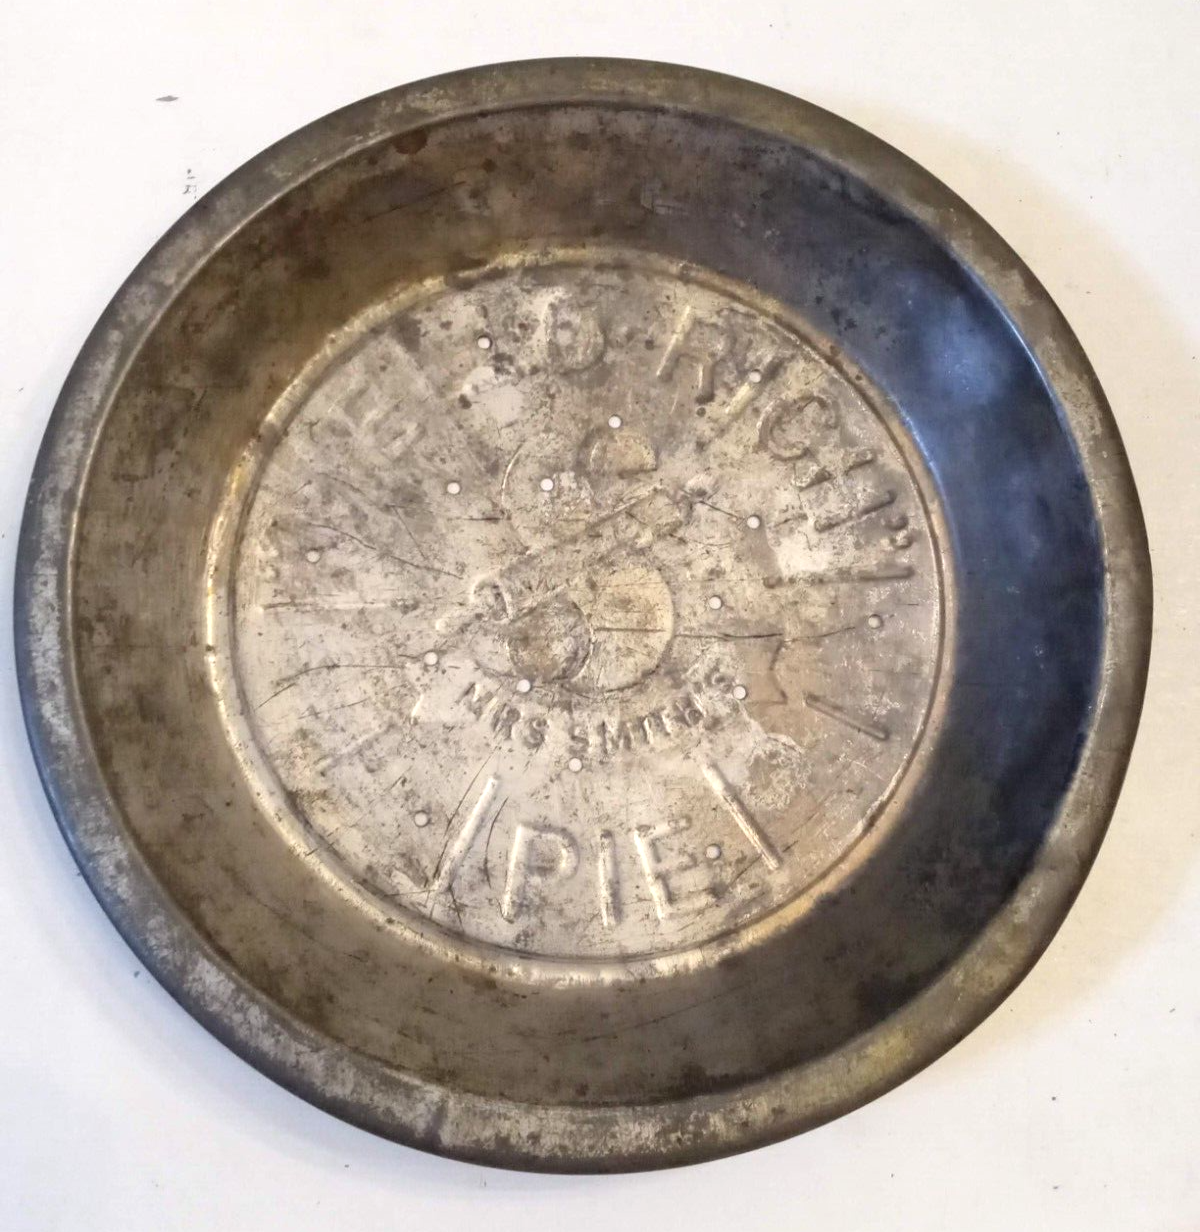 Primary image for Mrs. Smith's "Mello-Rich" Pie Tin Pan Perforated Bottom MCM VTG Metal Oven Ware